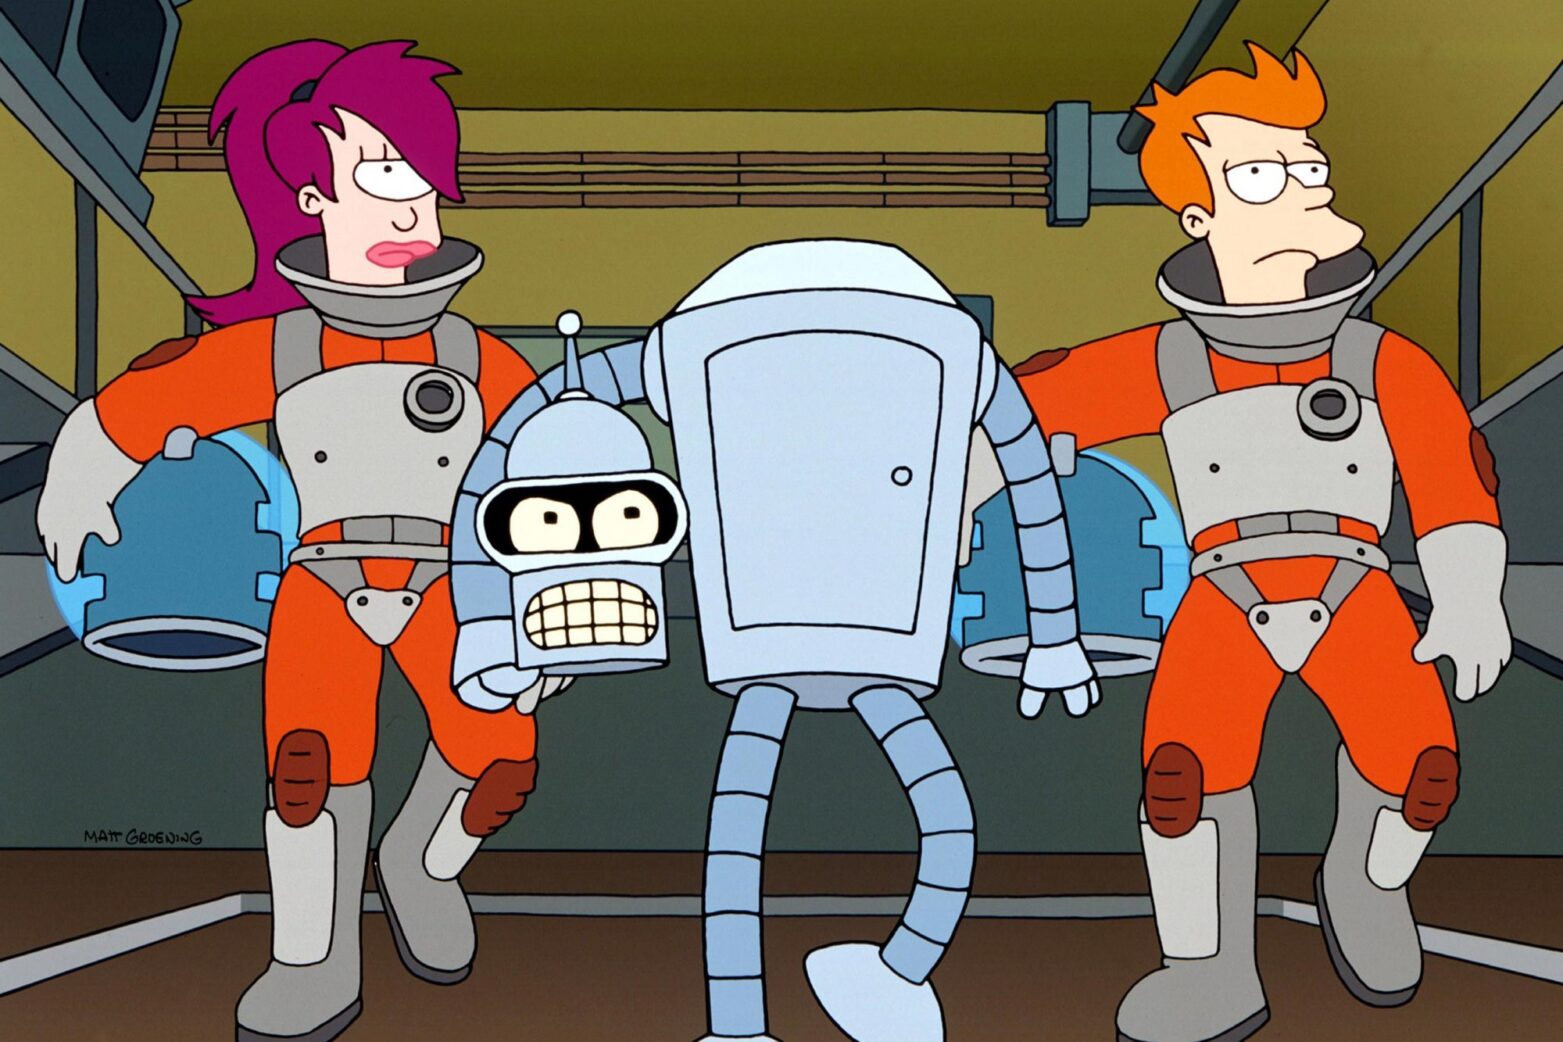 Futurama focuses on NFTs and cryptocurrencies.